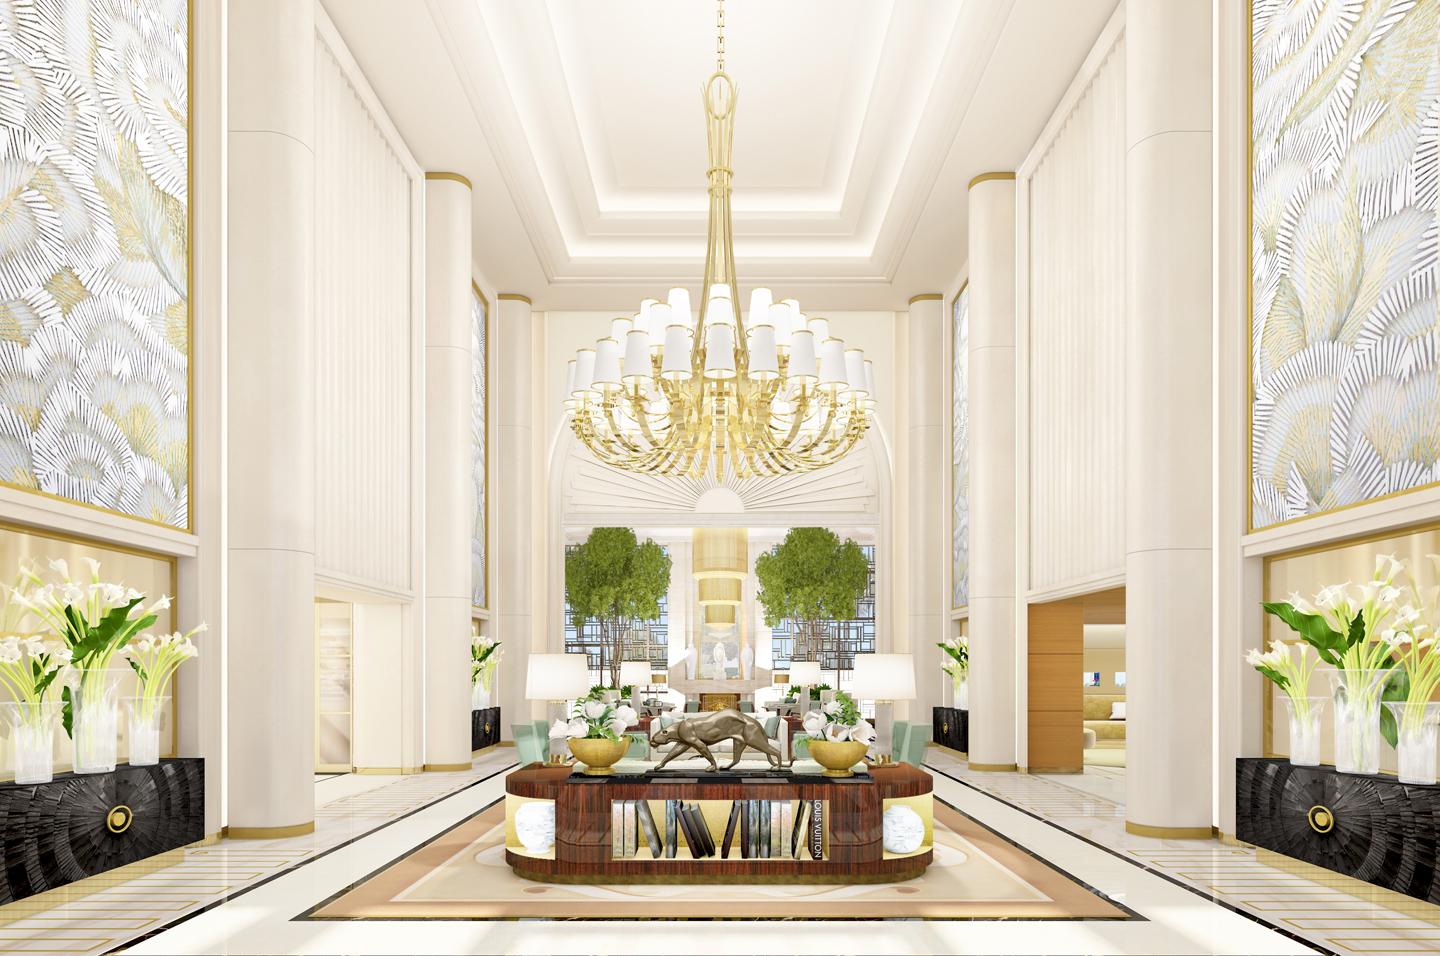 Designers PYR have interpreted Hollywood glamour and the Streamline Moderne style of the 1930s and 40s / Waldorf Astoria